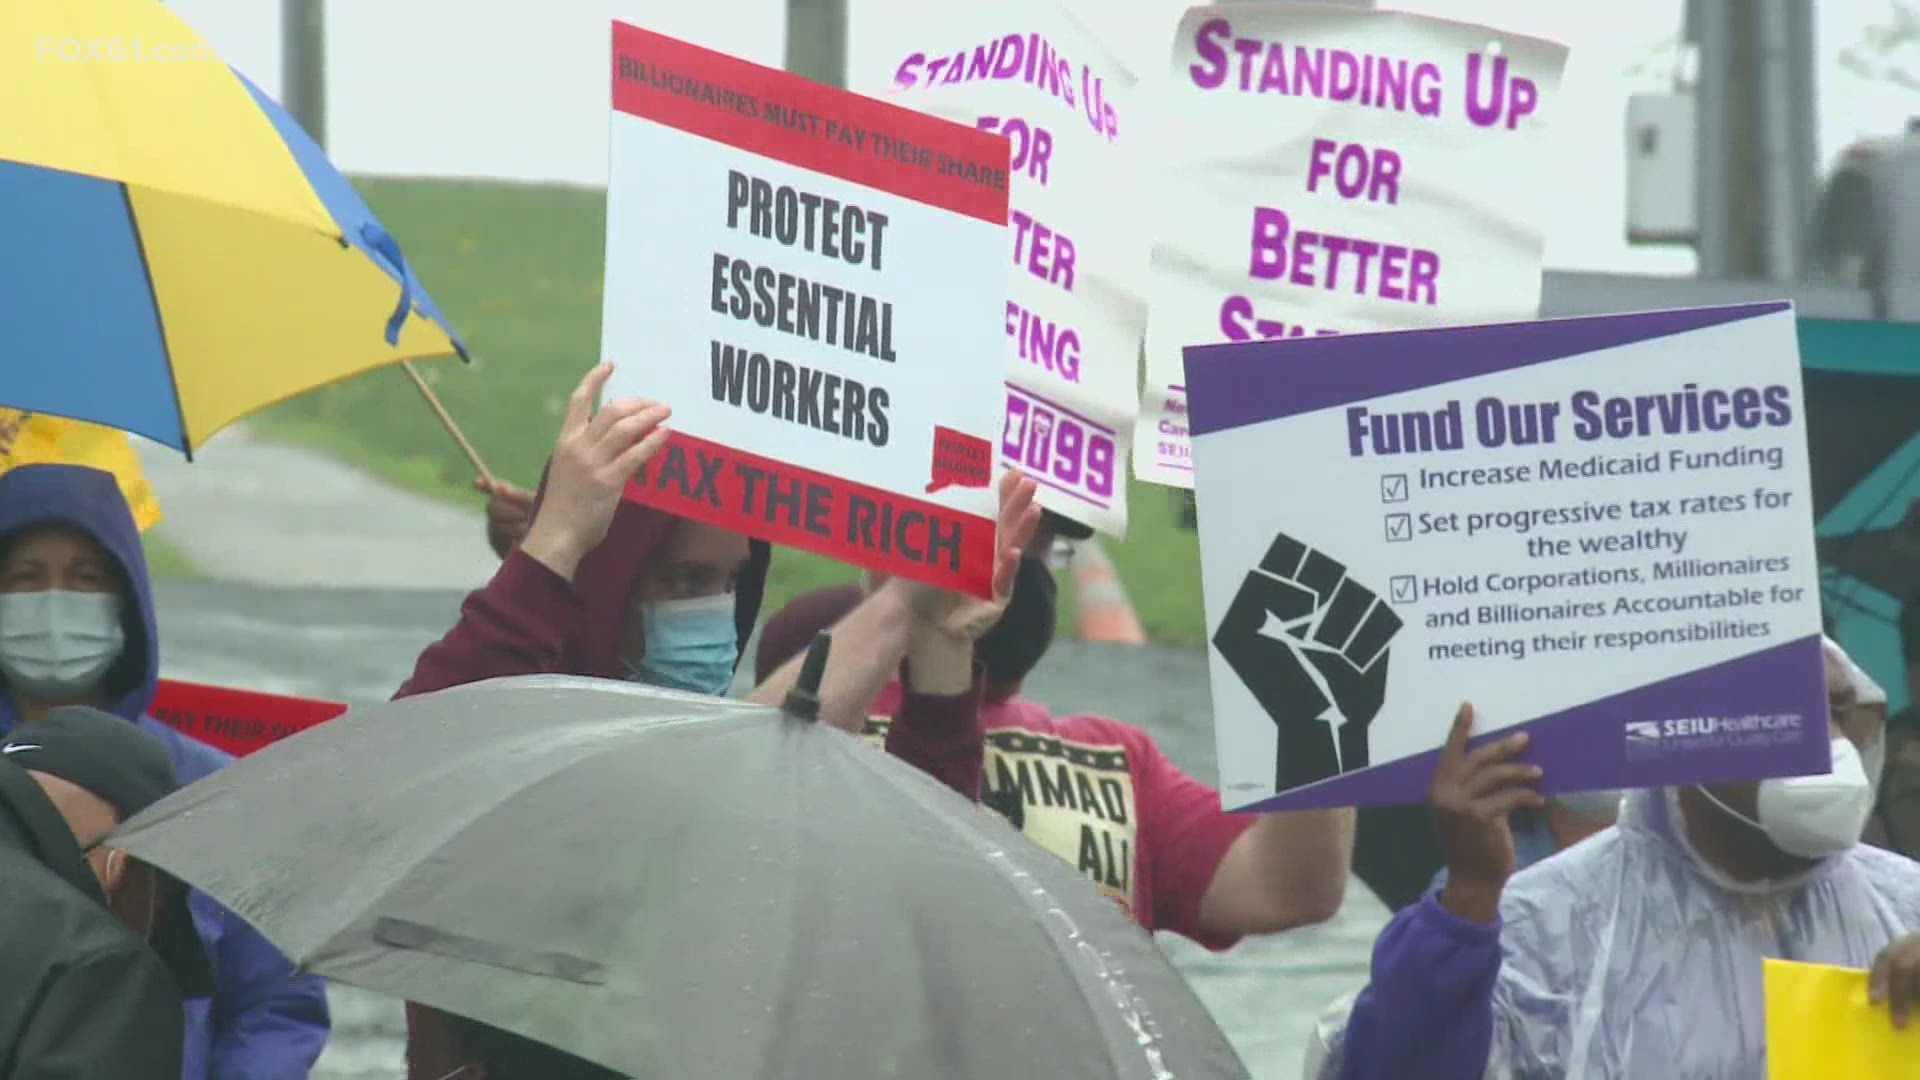 If an agreement is not reached soon, nursing home workers will go on strike on May 14.